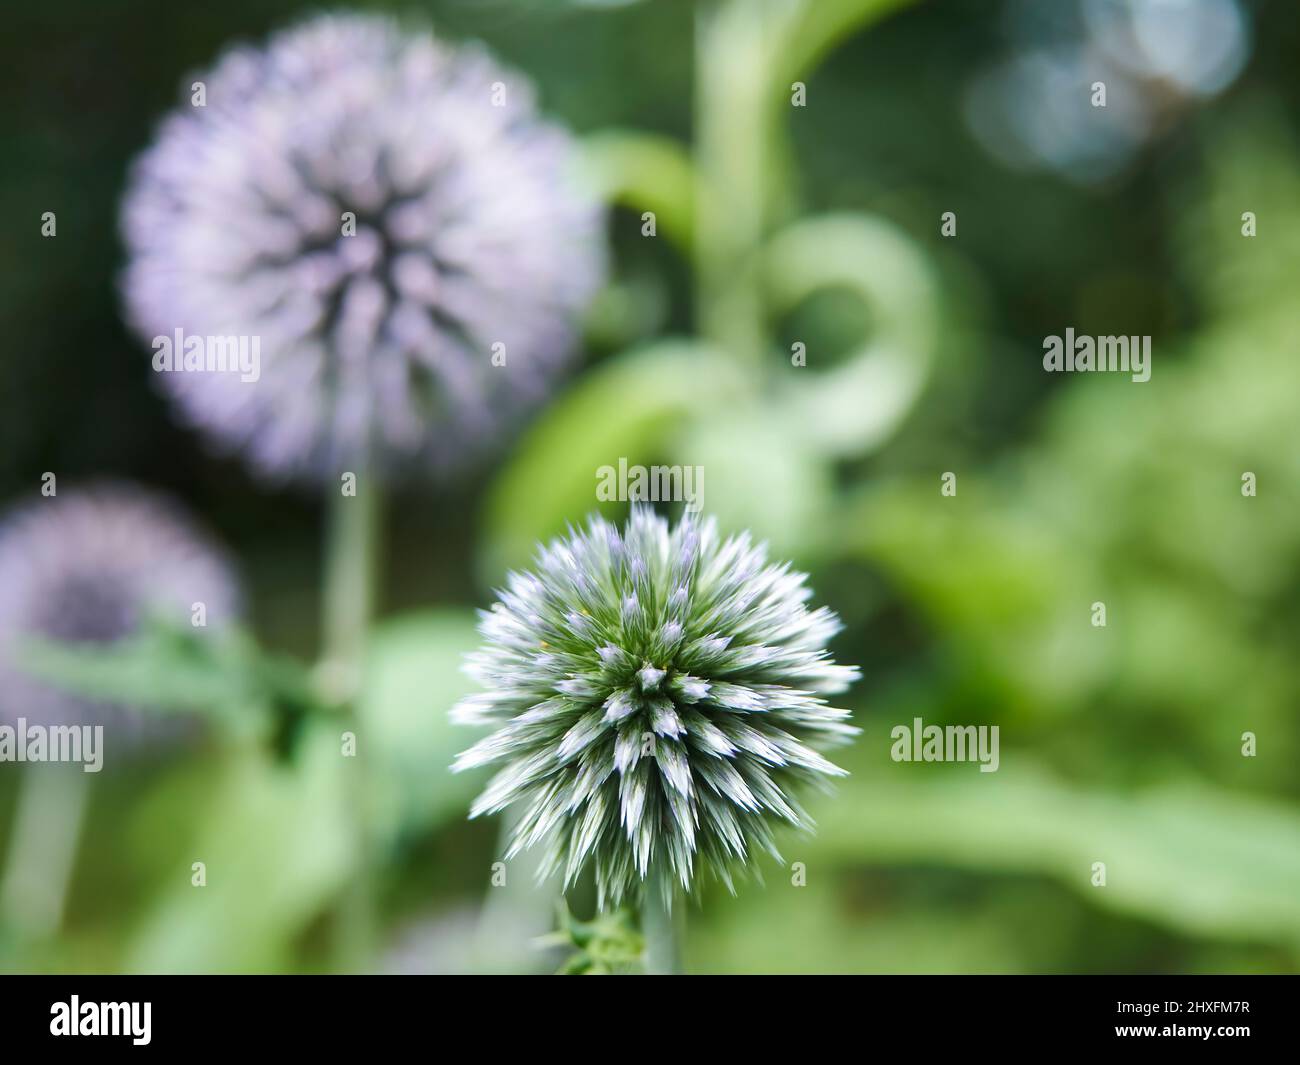 A small group of spiky, geometric Globe Thistles, gentle purples and greens complimenting each other, with a heavily defocused background. Stock Photo